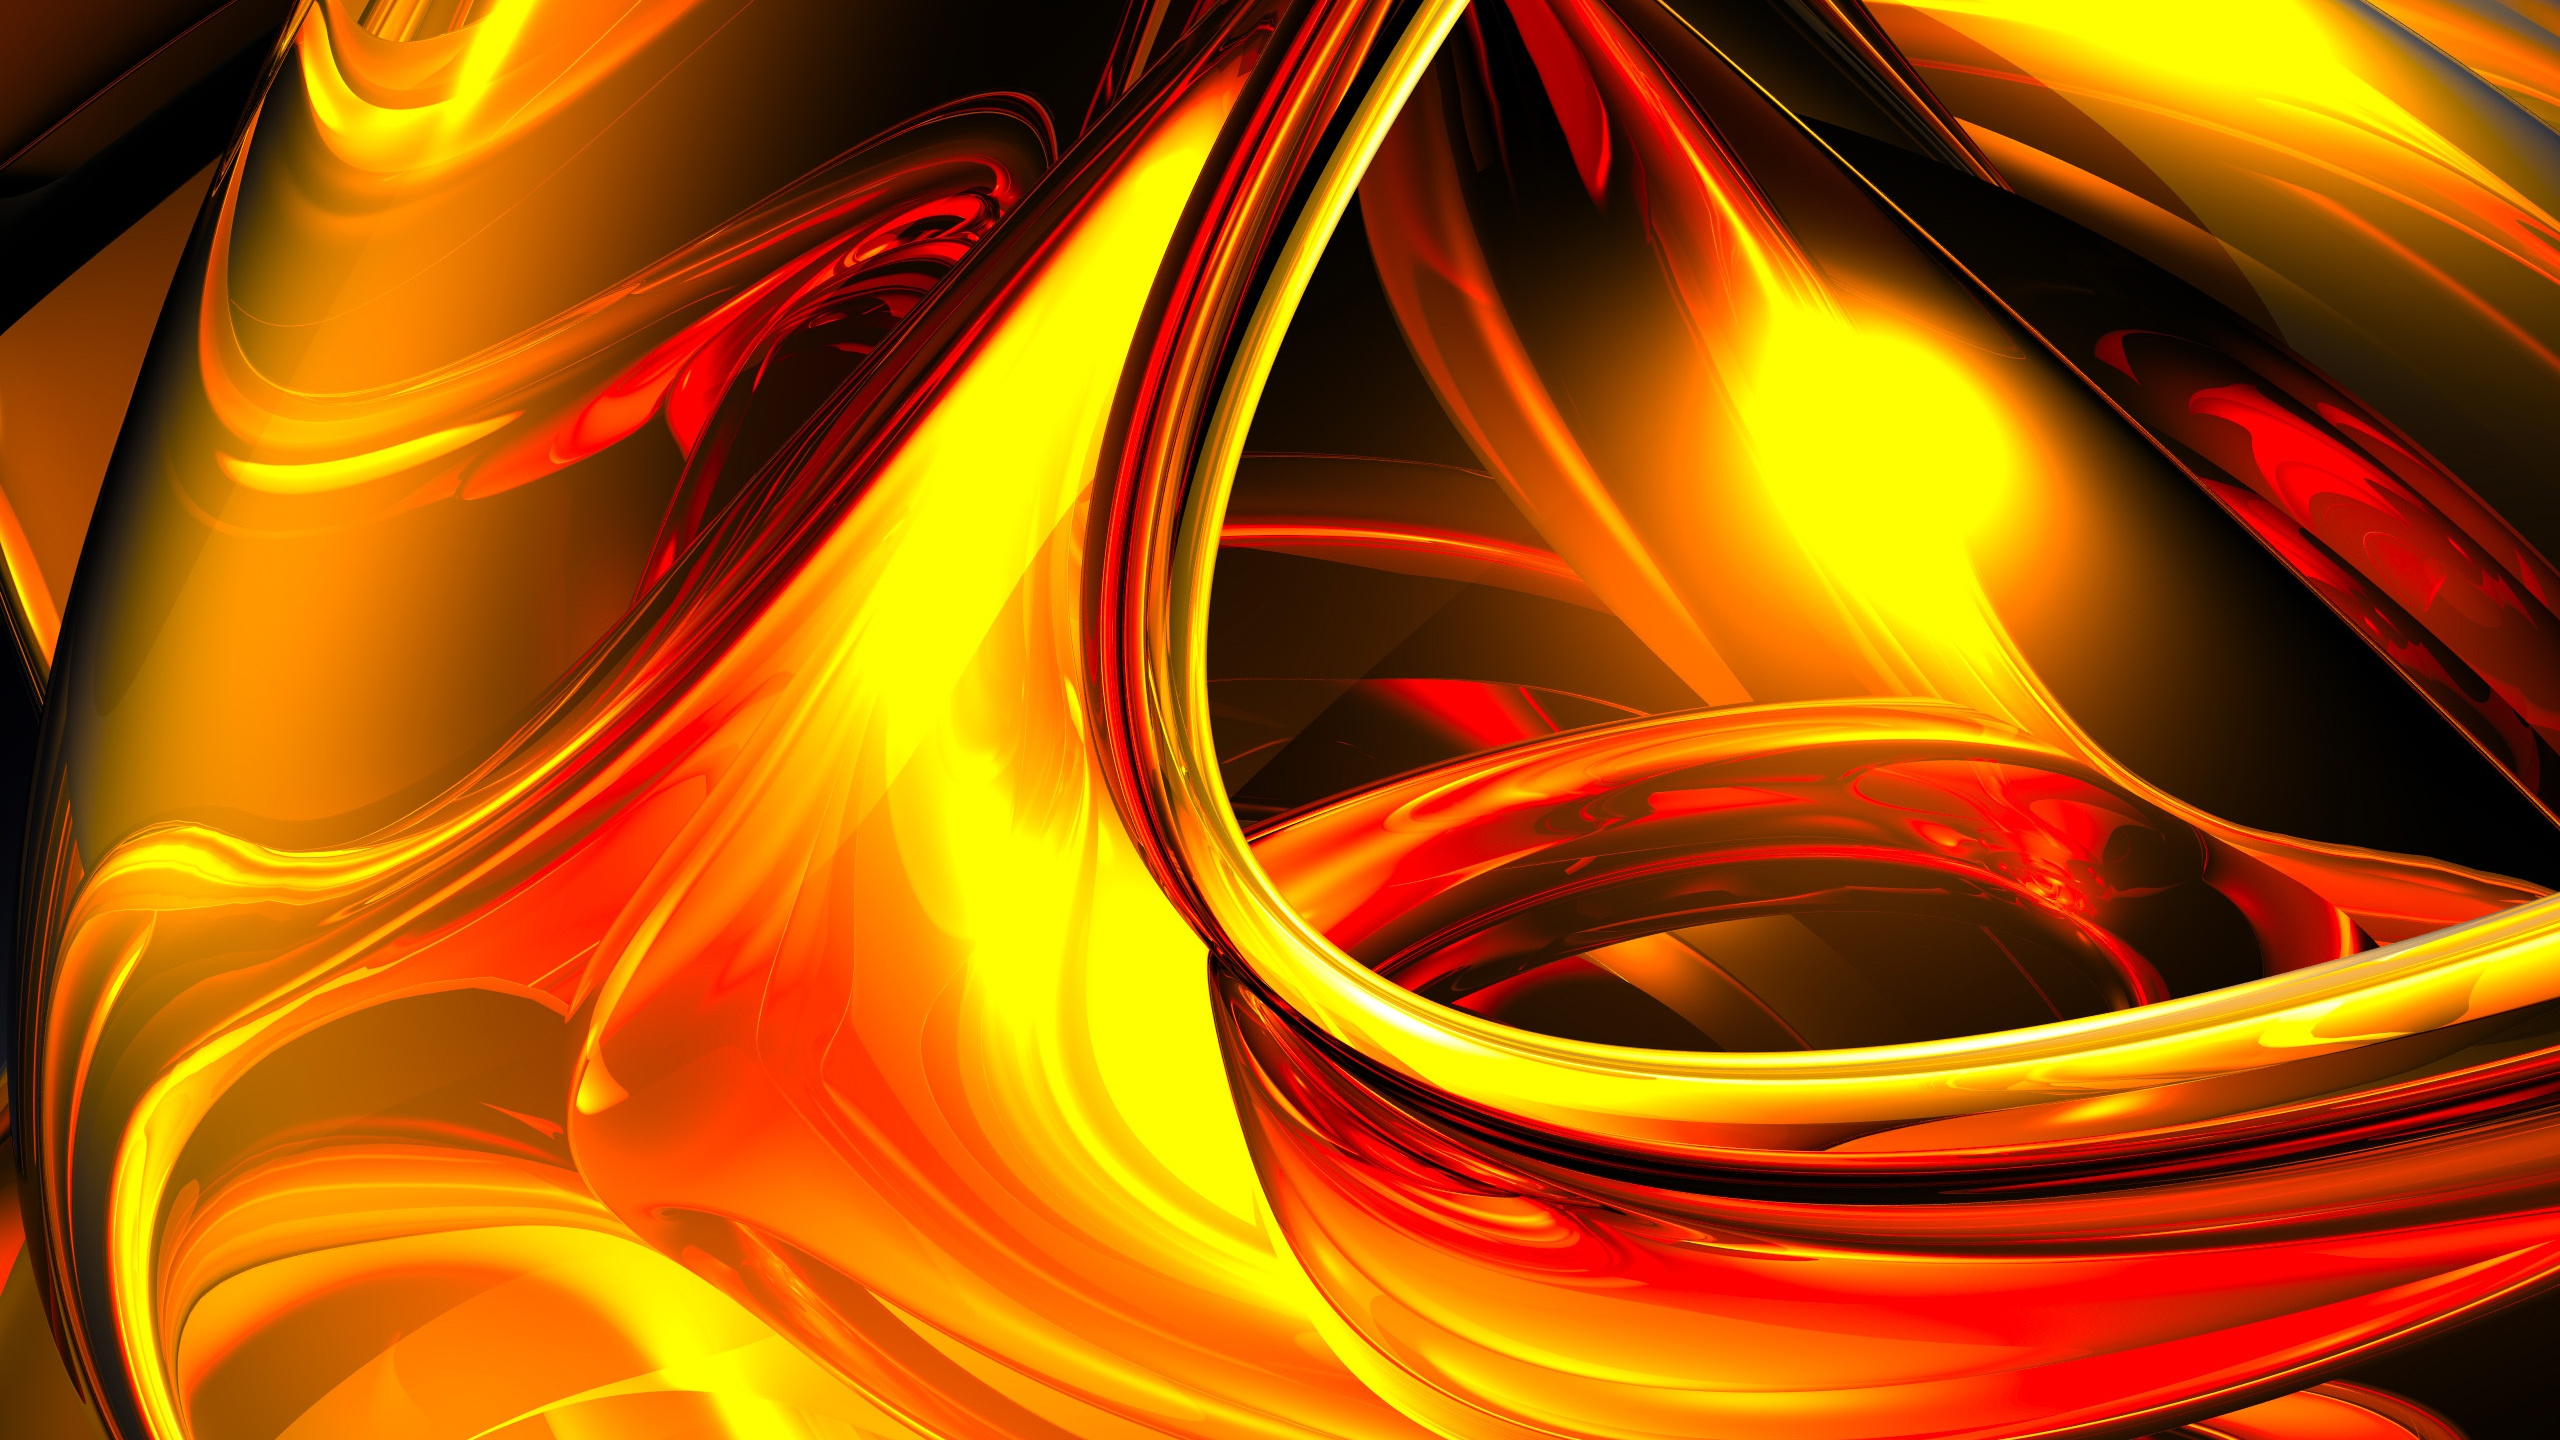 Red and Yellow Abstract Painting. Wallpaper in 2560x1440 Resolution